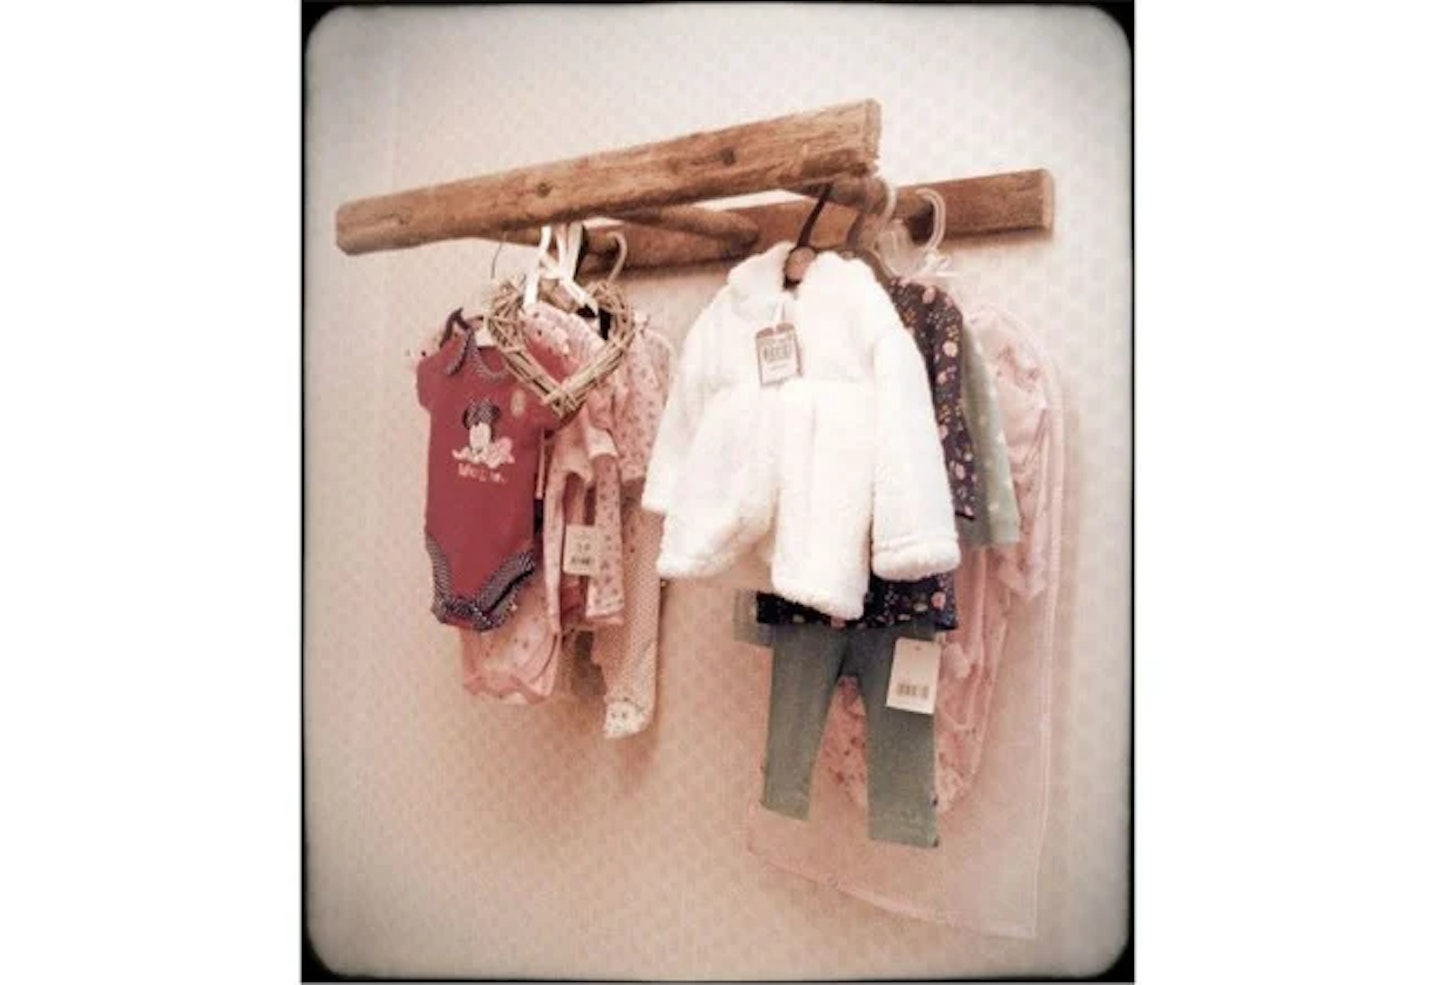 Ladder as a clothes rail with clothes hanging on